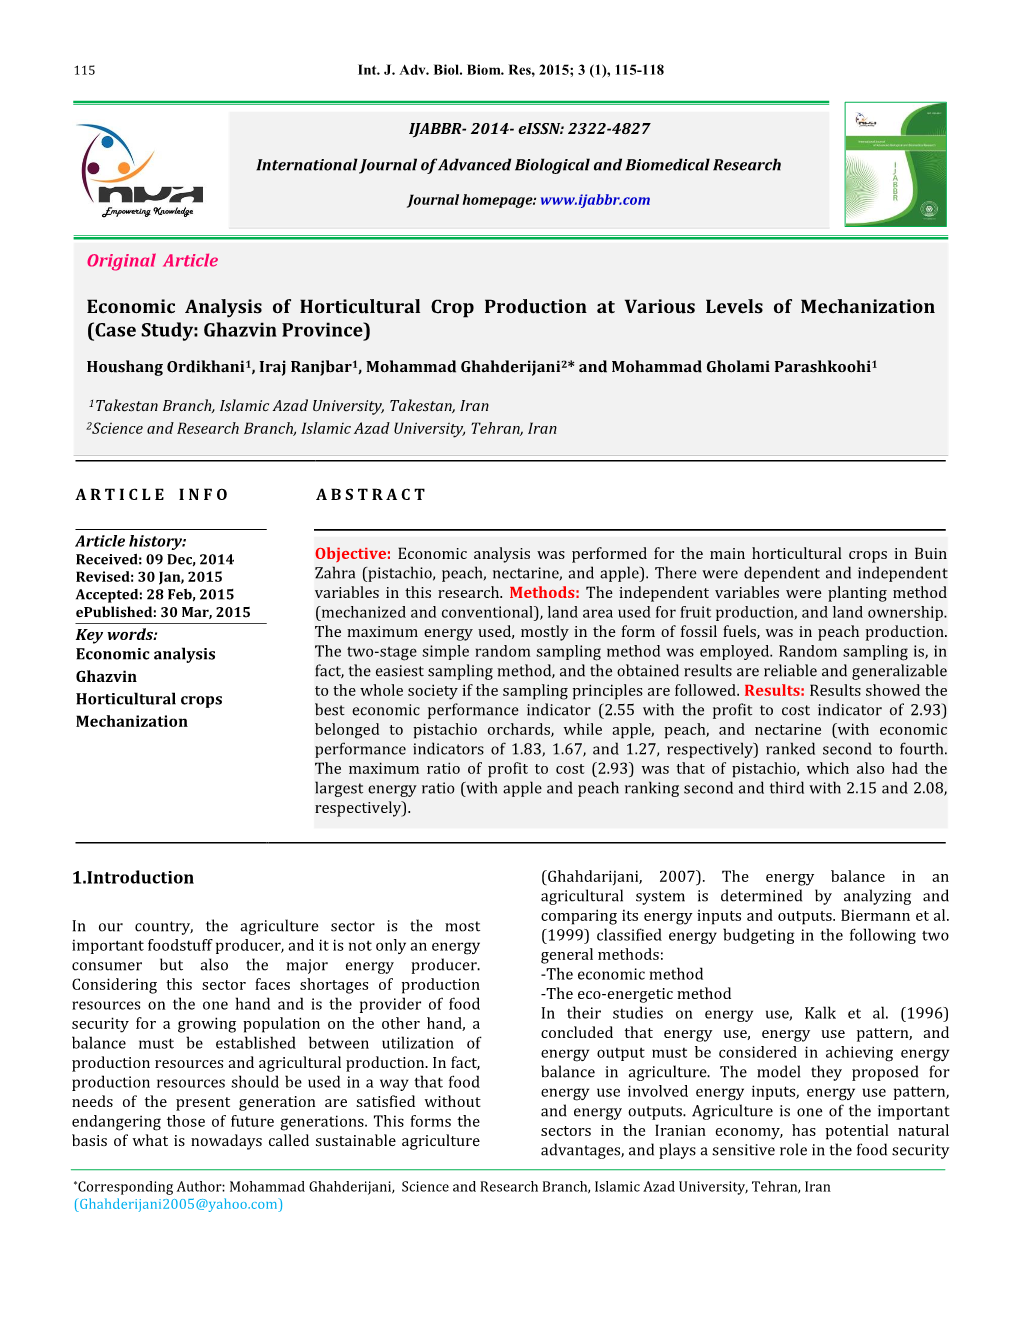 Economic Analysis of Horticultural Crop Production at Various Levels of Mechanization (Case Study: Ghazvin Province)